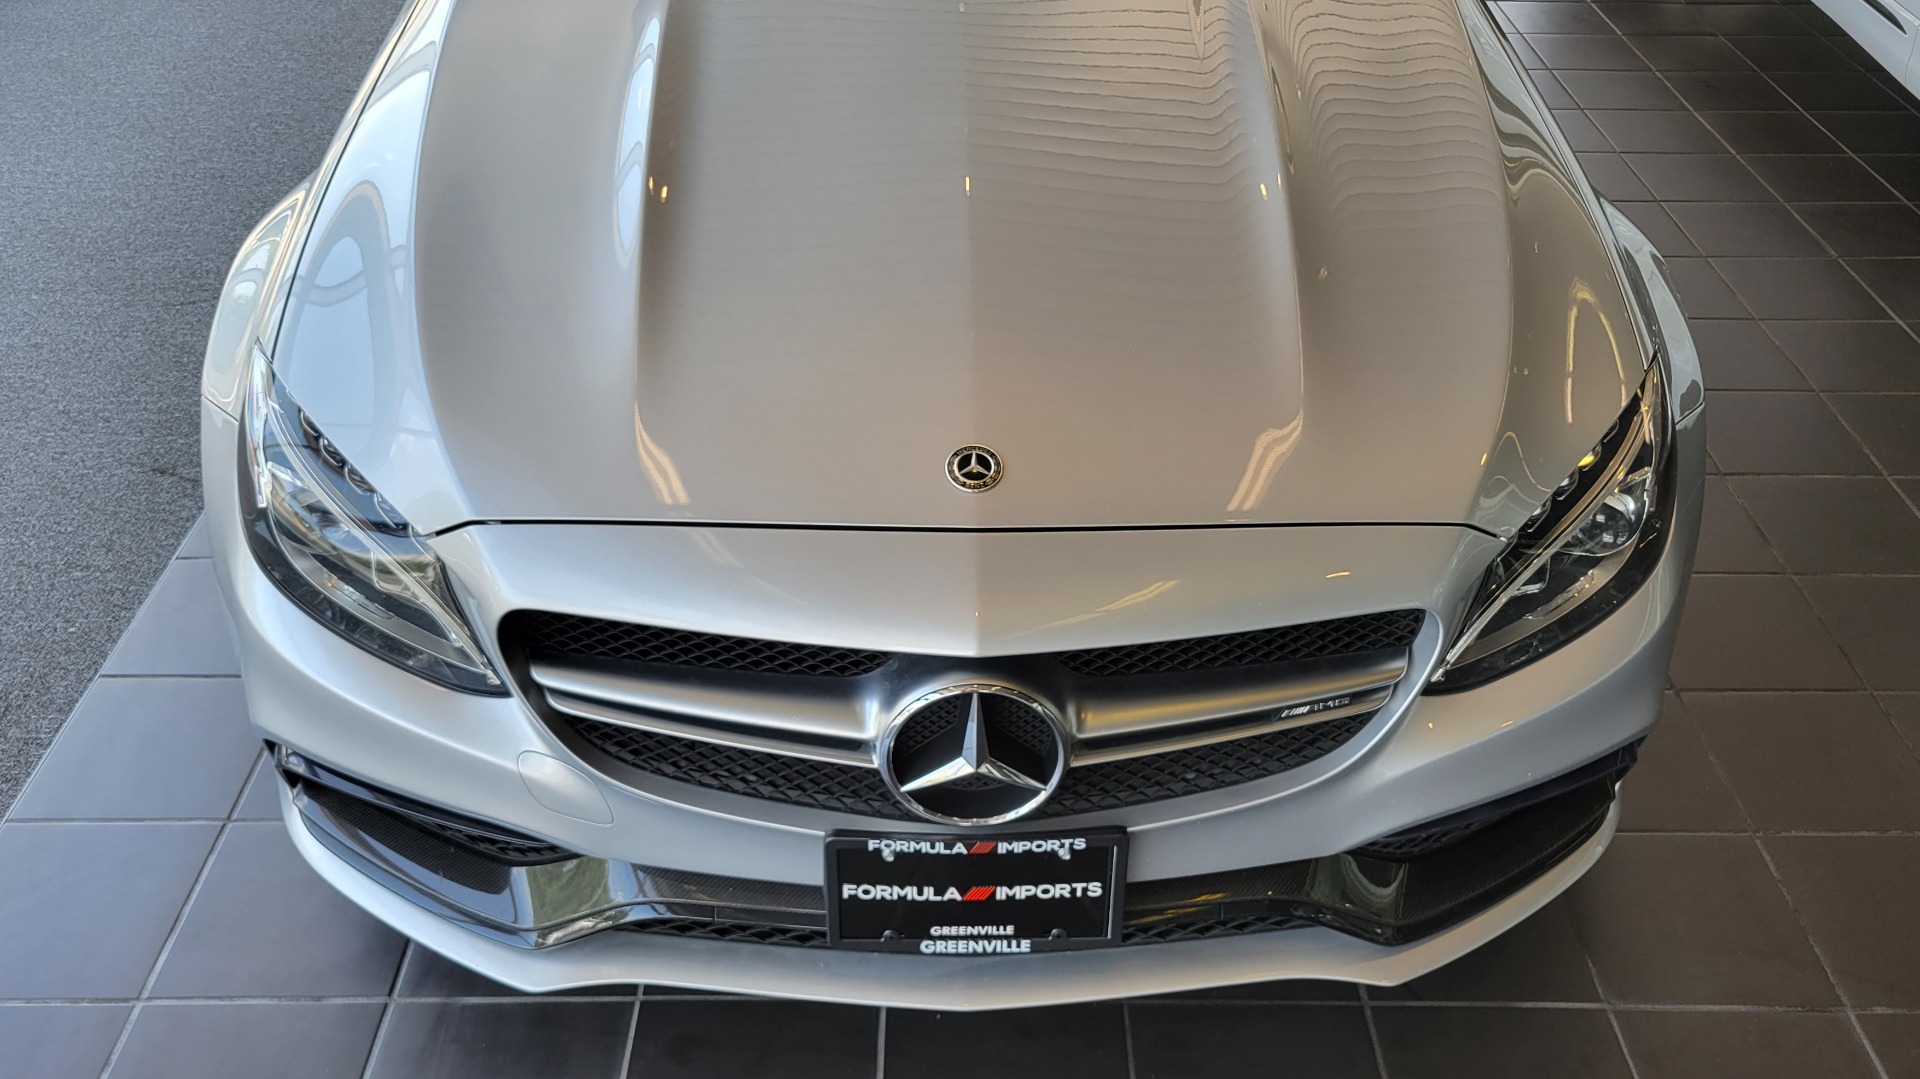 Used 2018 Mercedes-Benz C-CLASS AMG C 63 S CABRIOLET / 4.0L V8 / 7-SPD AUTO / PREMIUM / AMG PERF for sale $71,995 at Formula Imports in Charlotte NC 28227 20